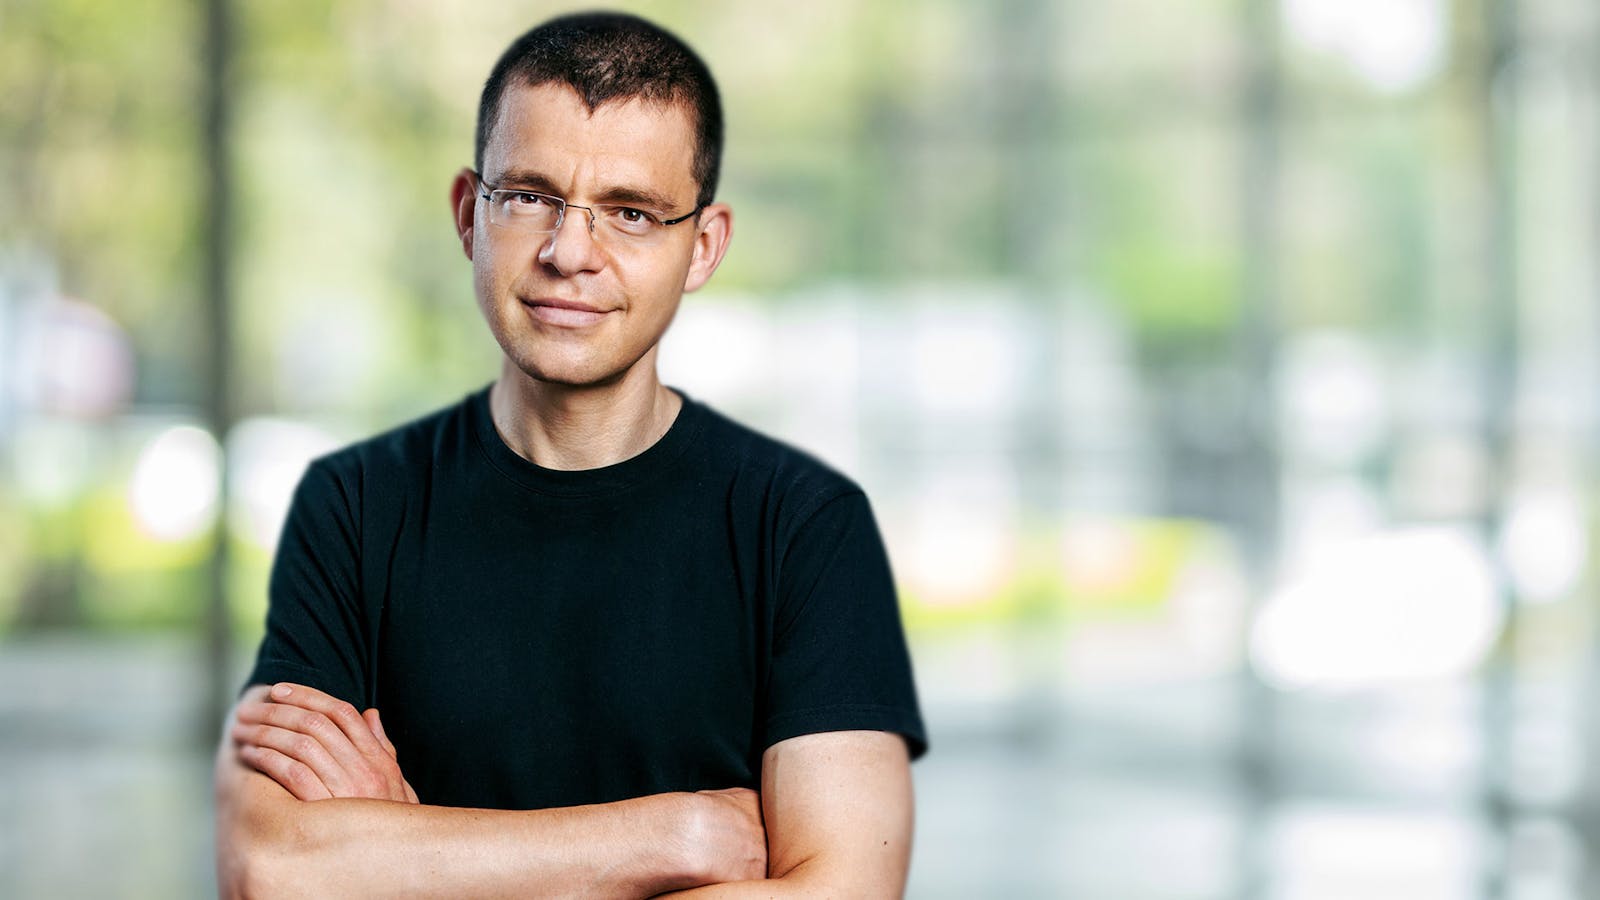 Affirm CEO Max Levchin. Photo courtesy of Affirm